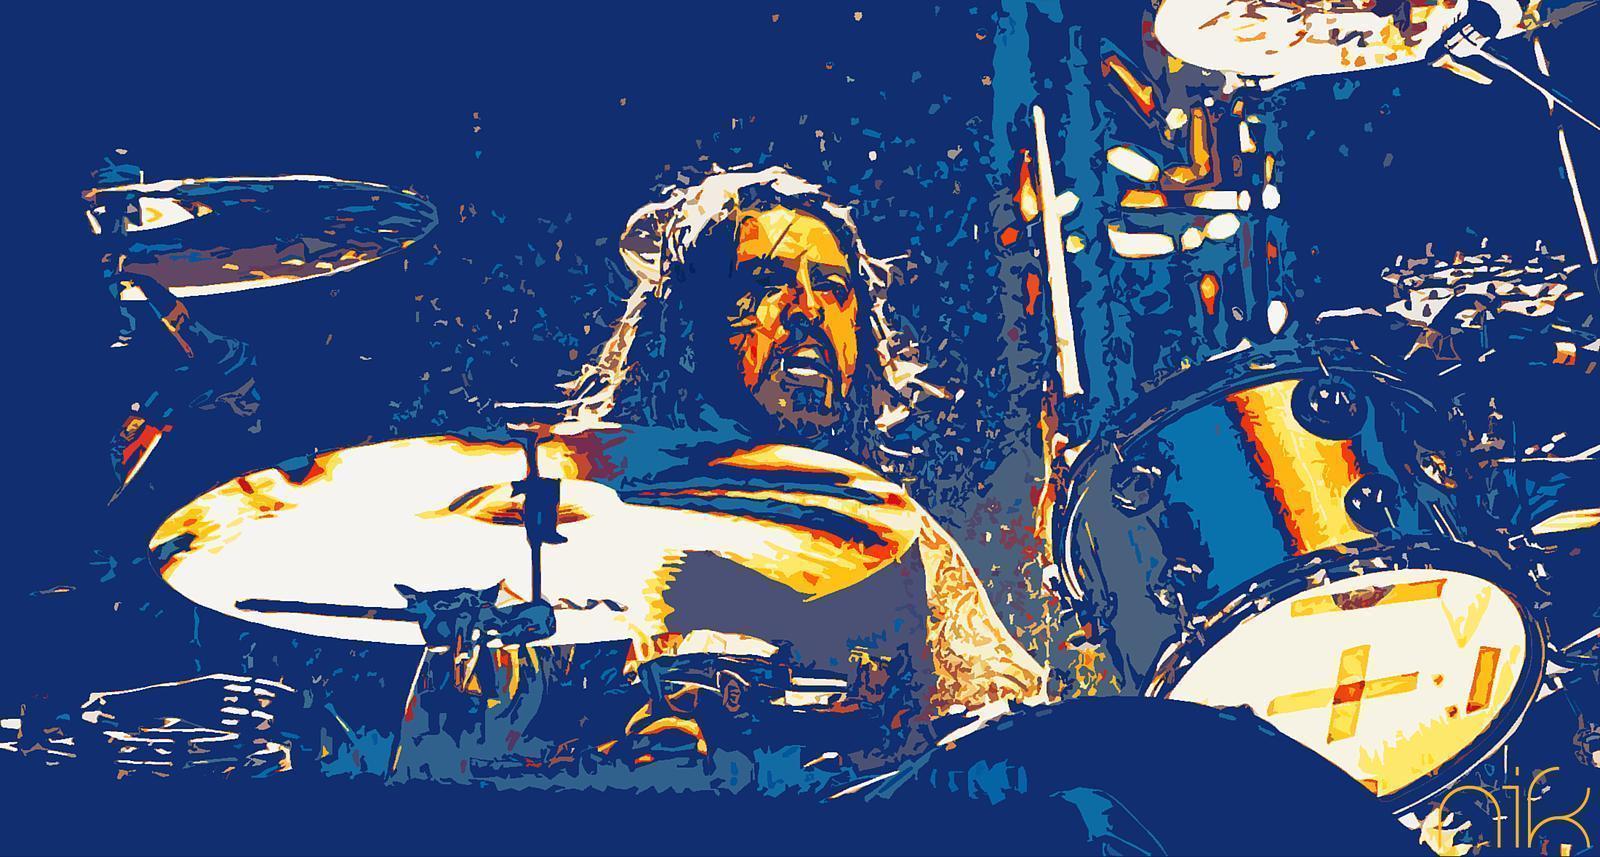 Dave Grohl on Drums